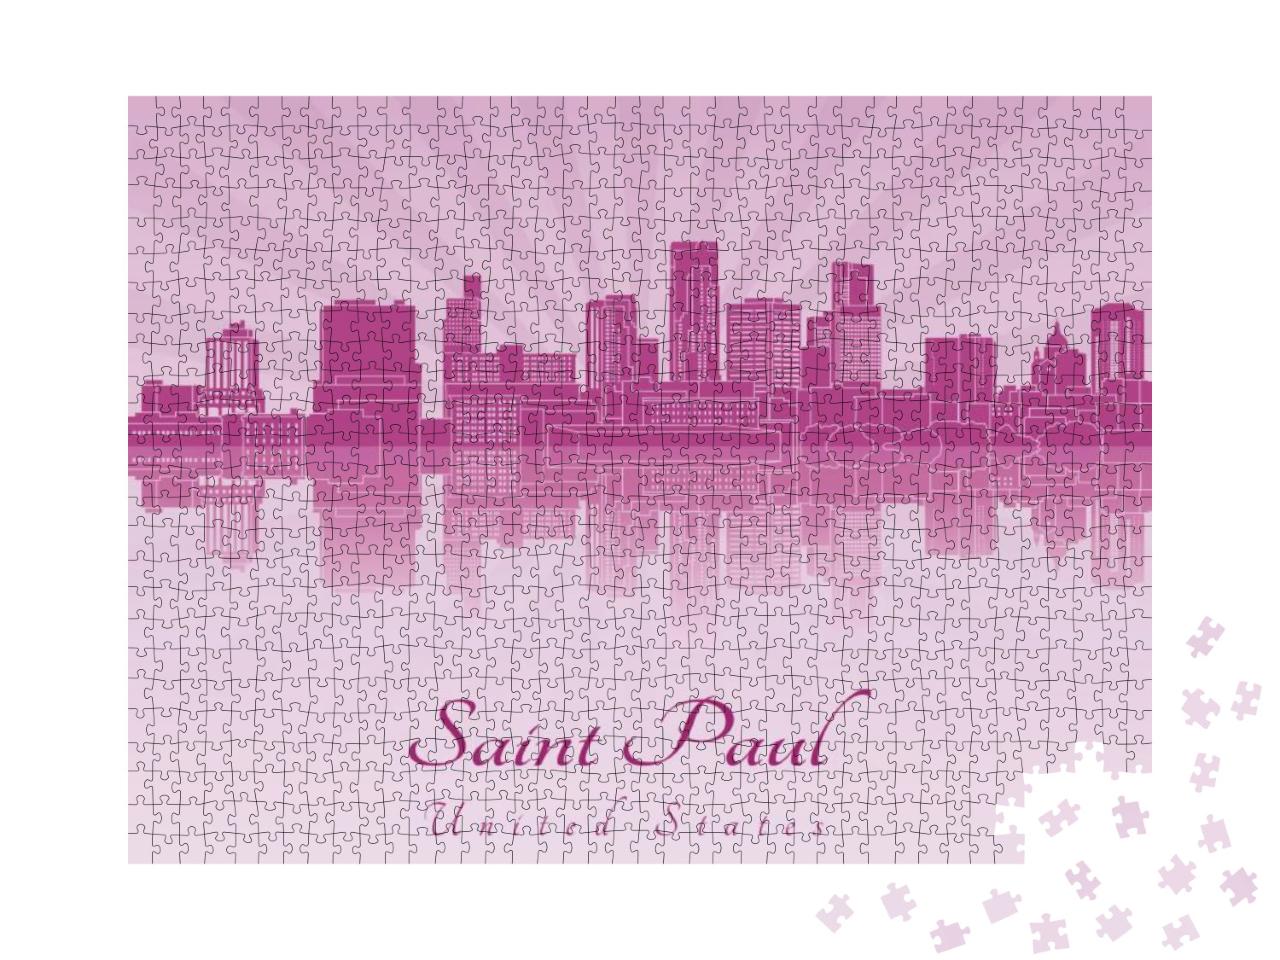 Saint Paul Skyline in Purple Radiant Orchid in Editable V... Jigsaw Puzzle with 1000 pieces